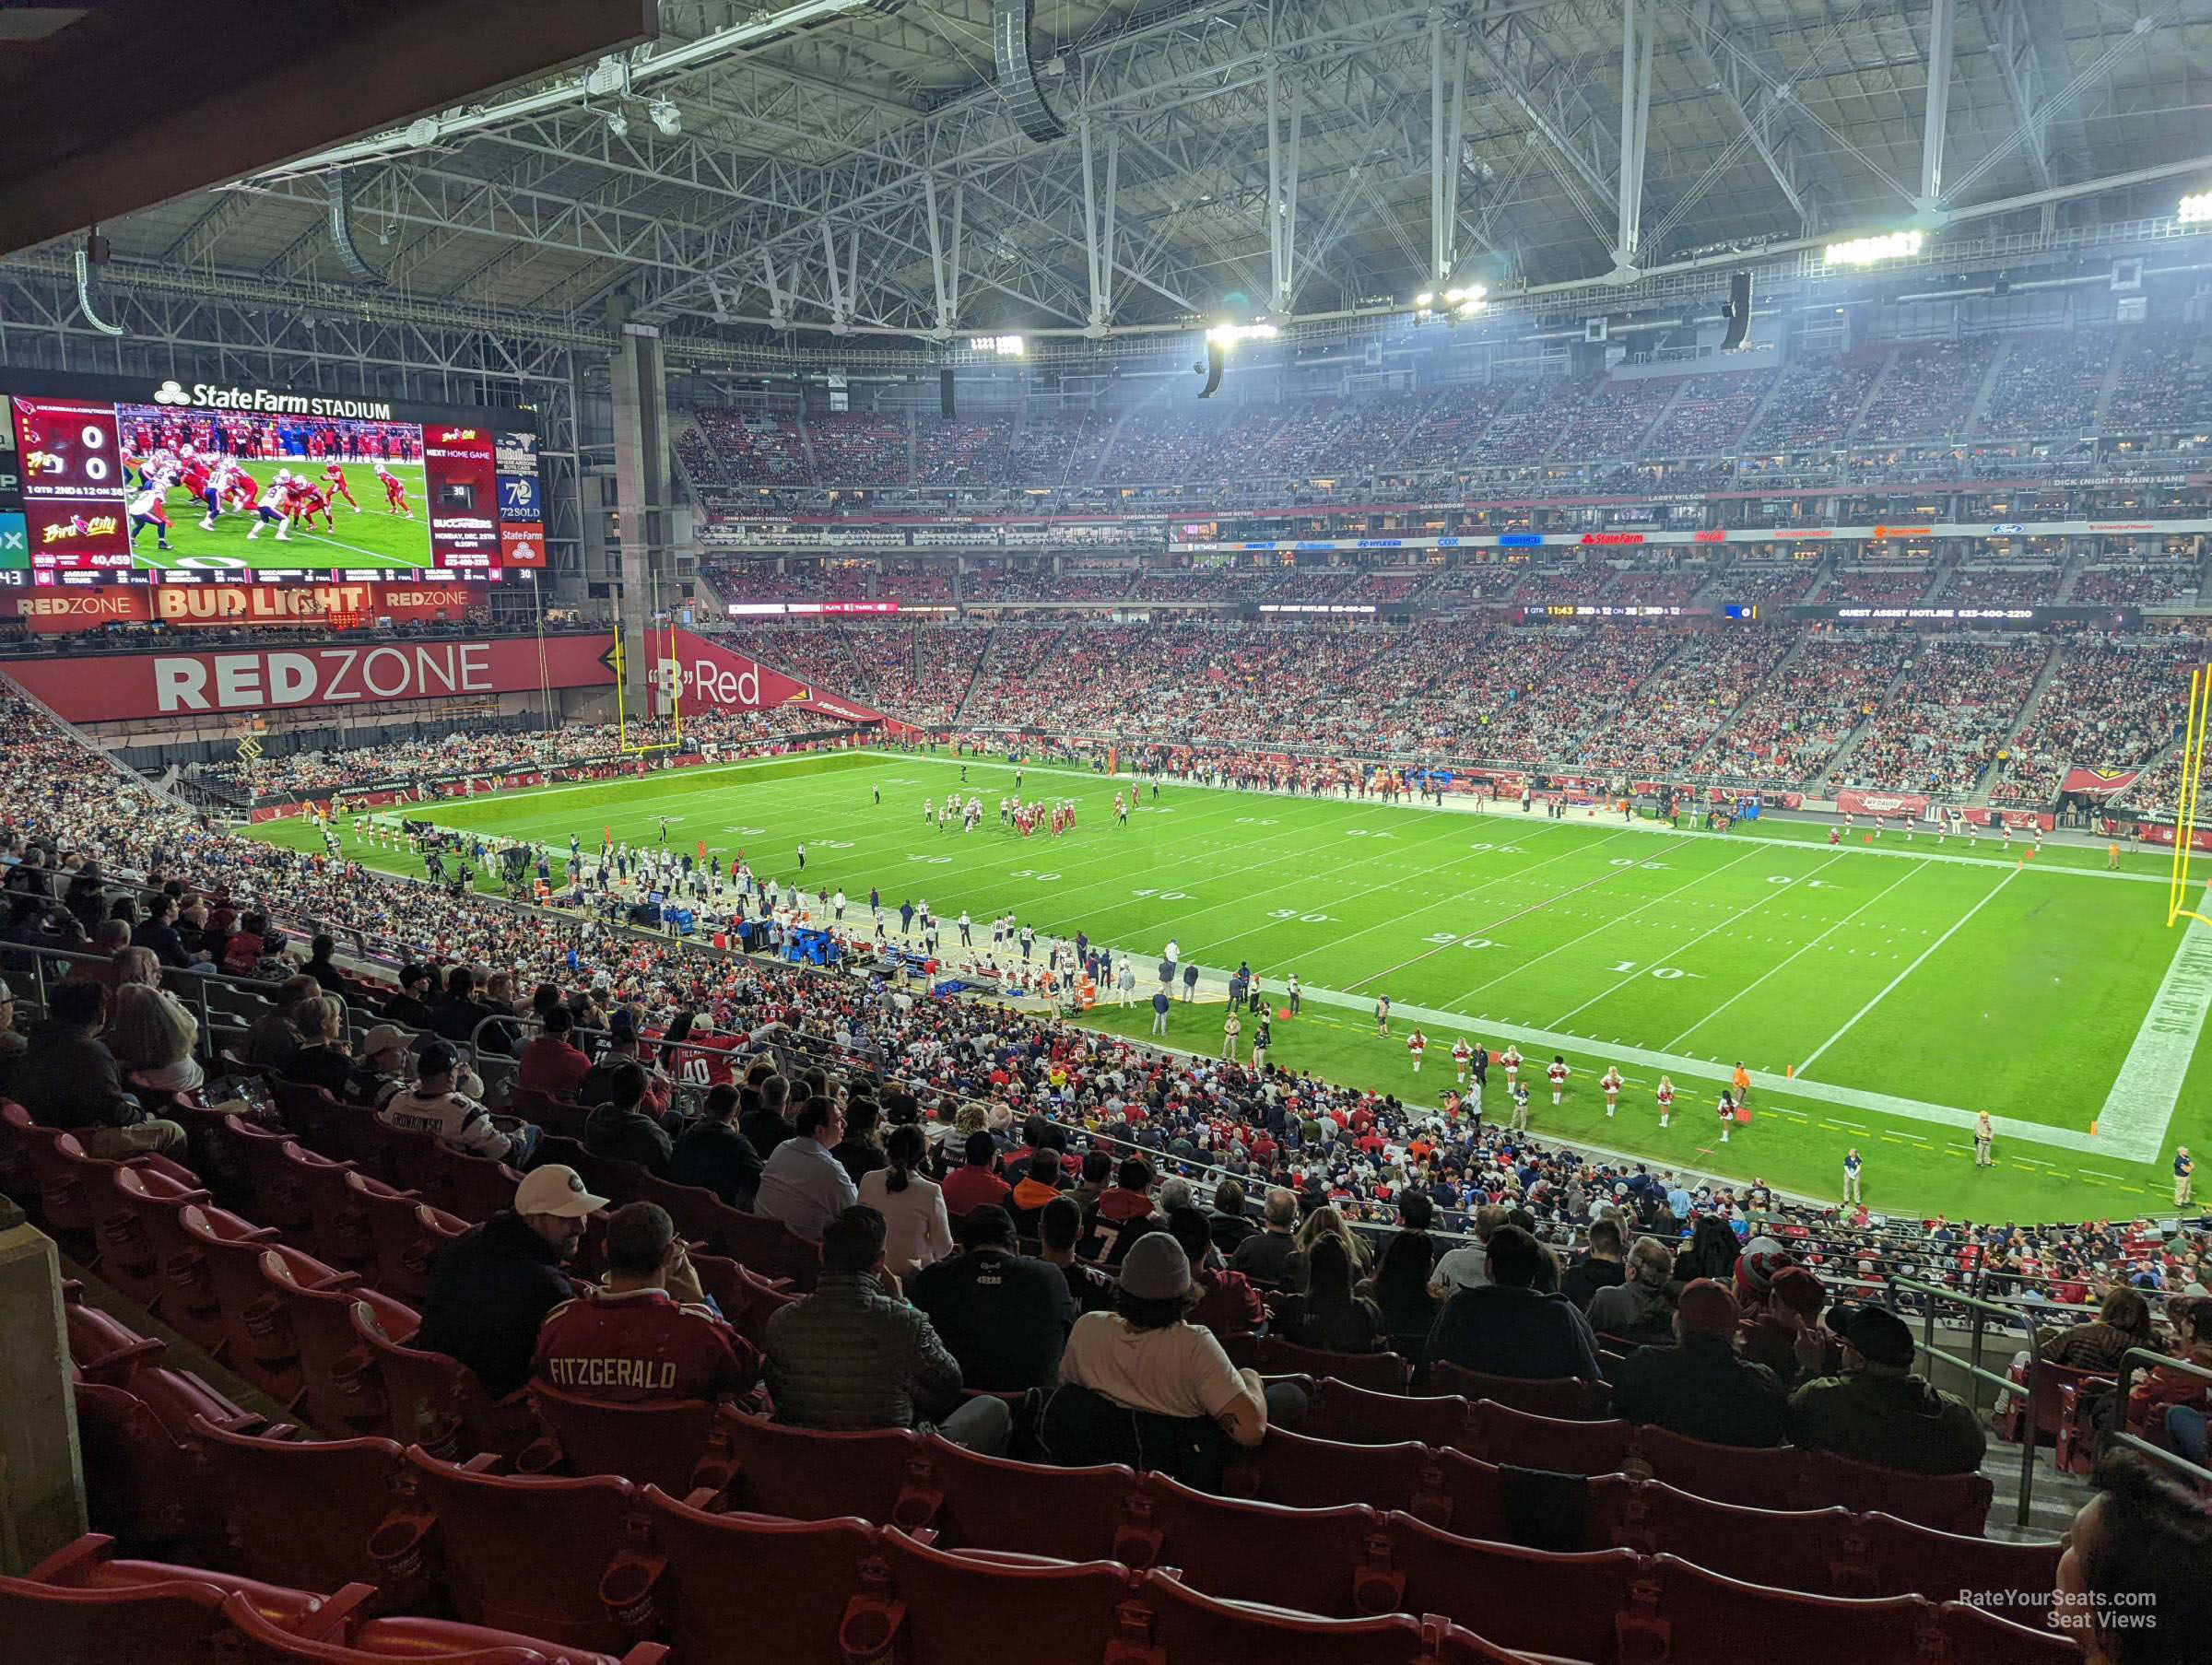 section 232, row 12 seat view  for football - state farm stadium